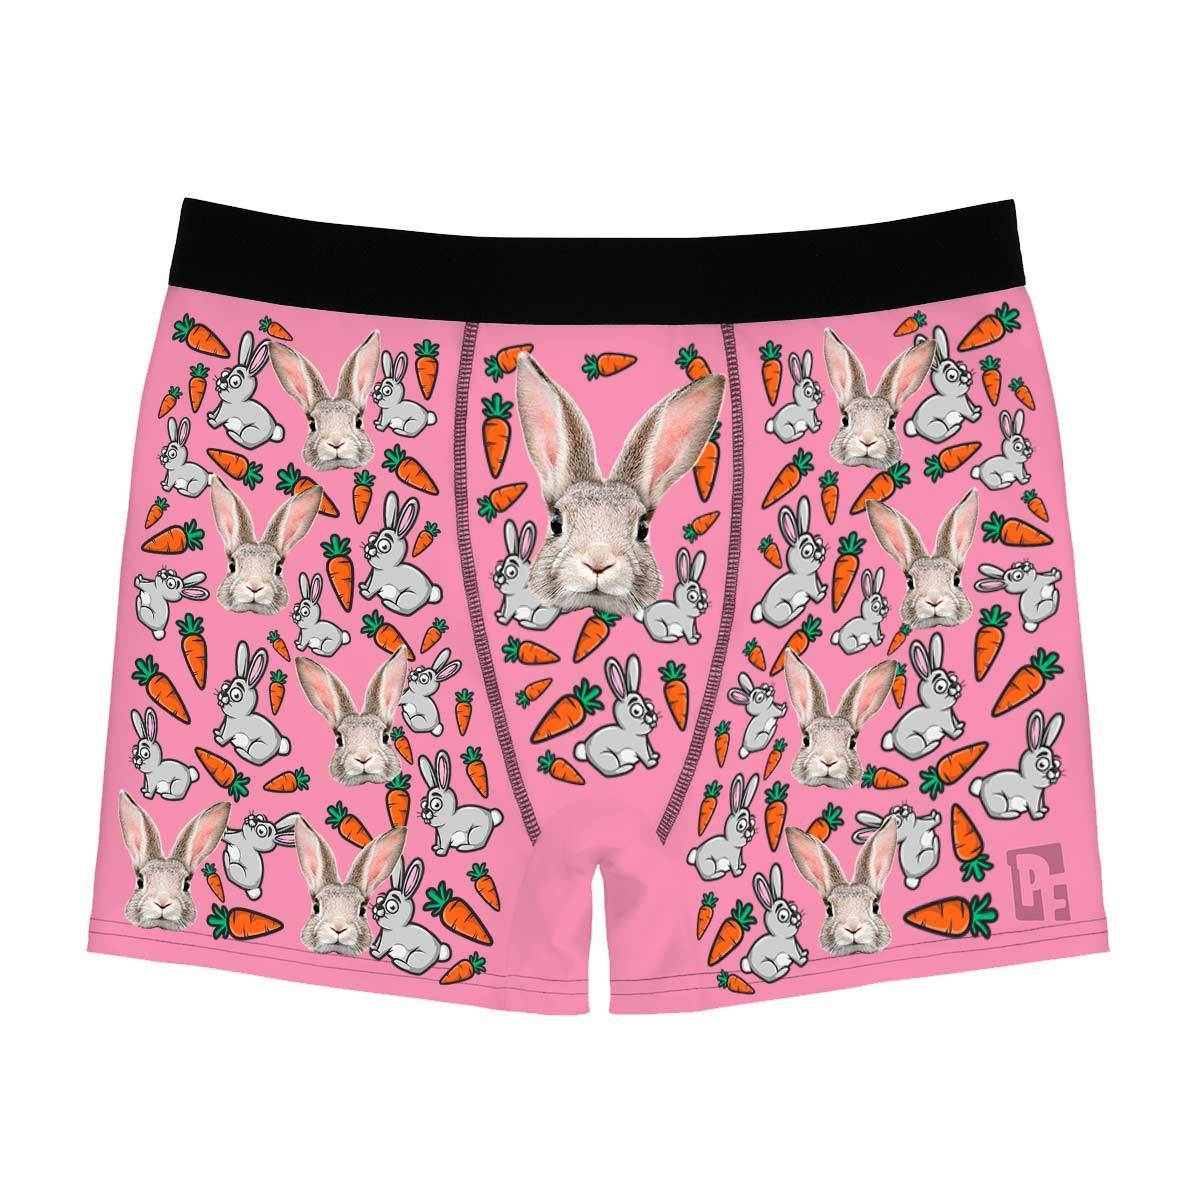 Pink Bunny men's boxer briefs personalized with photo printed on them